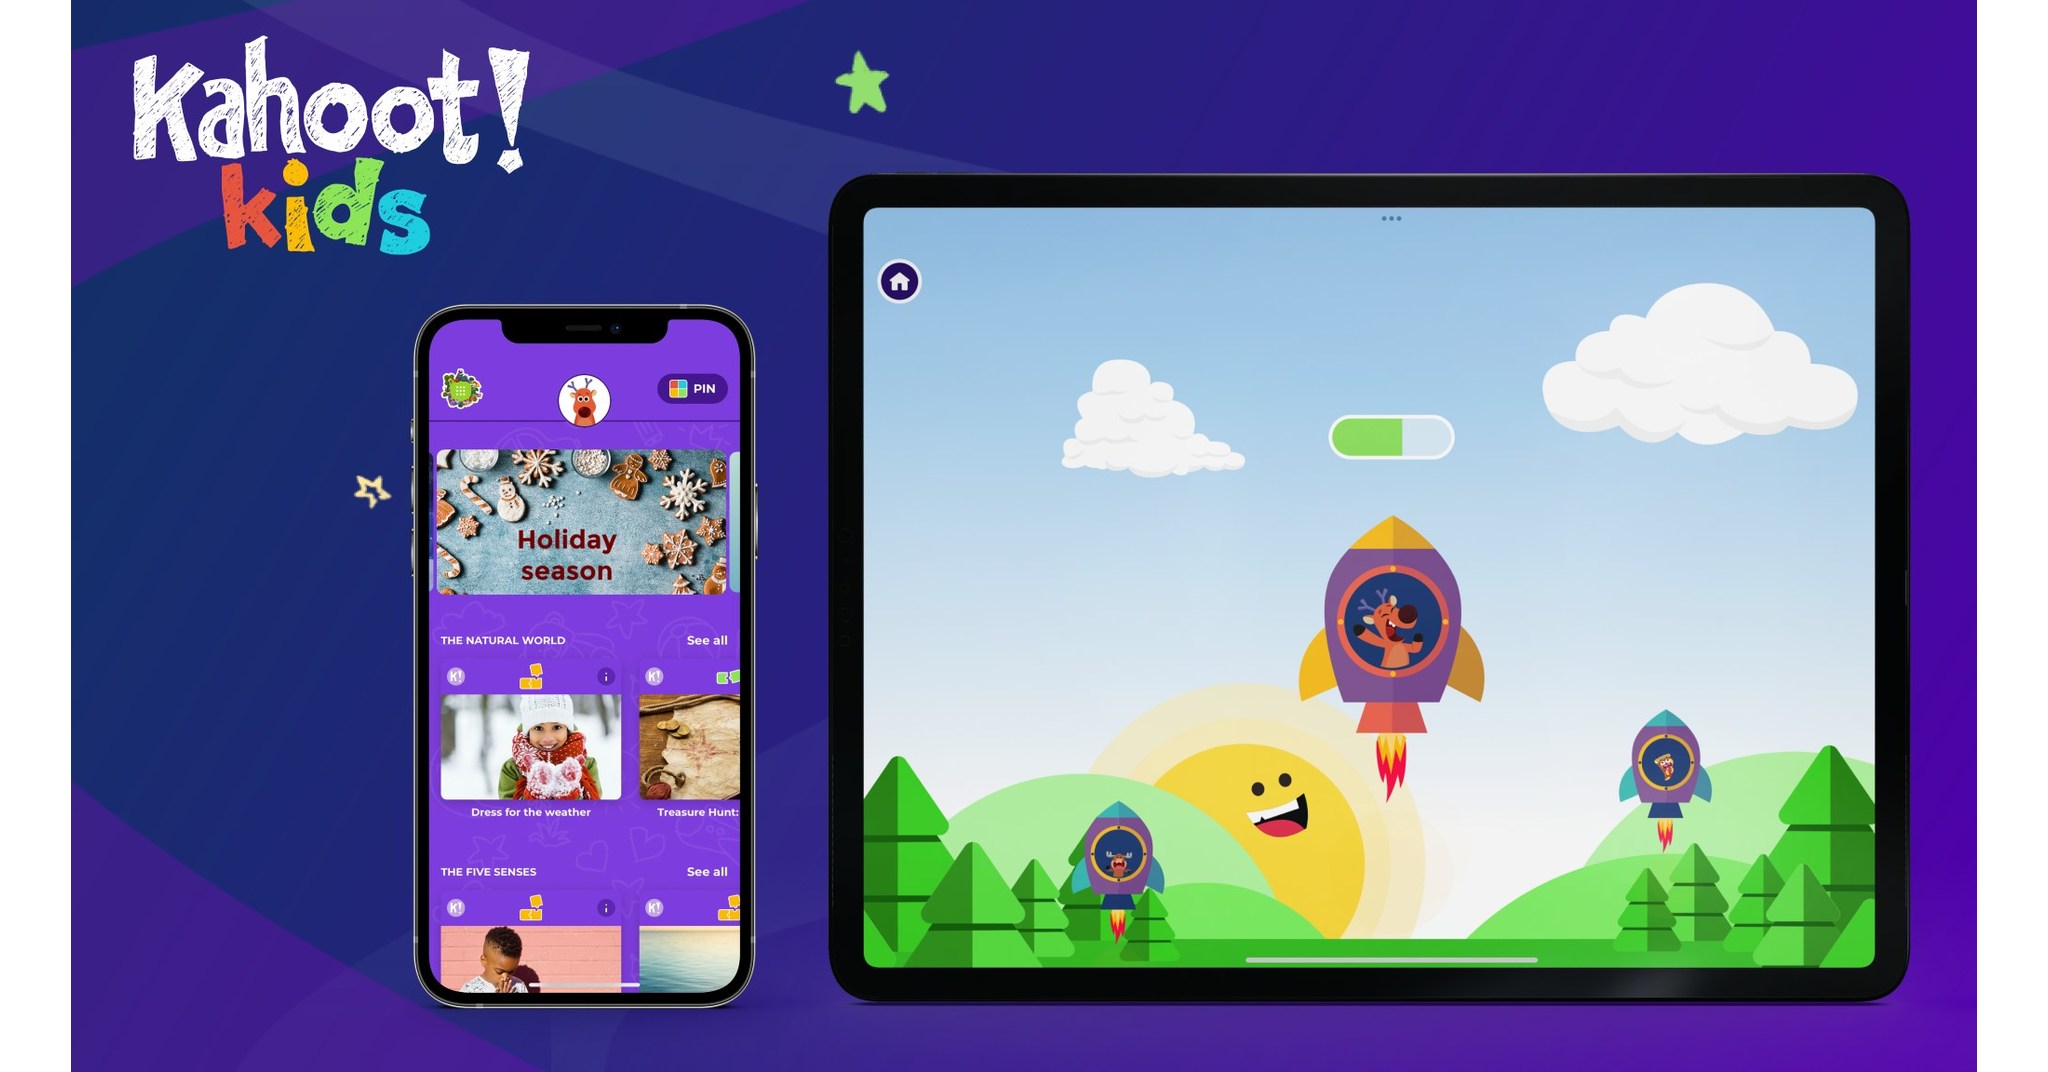 Meet Kahoot! Kids: a new app experience designed to spark curiosity and  encourage playful early childhood learning